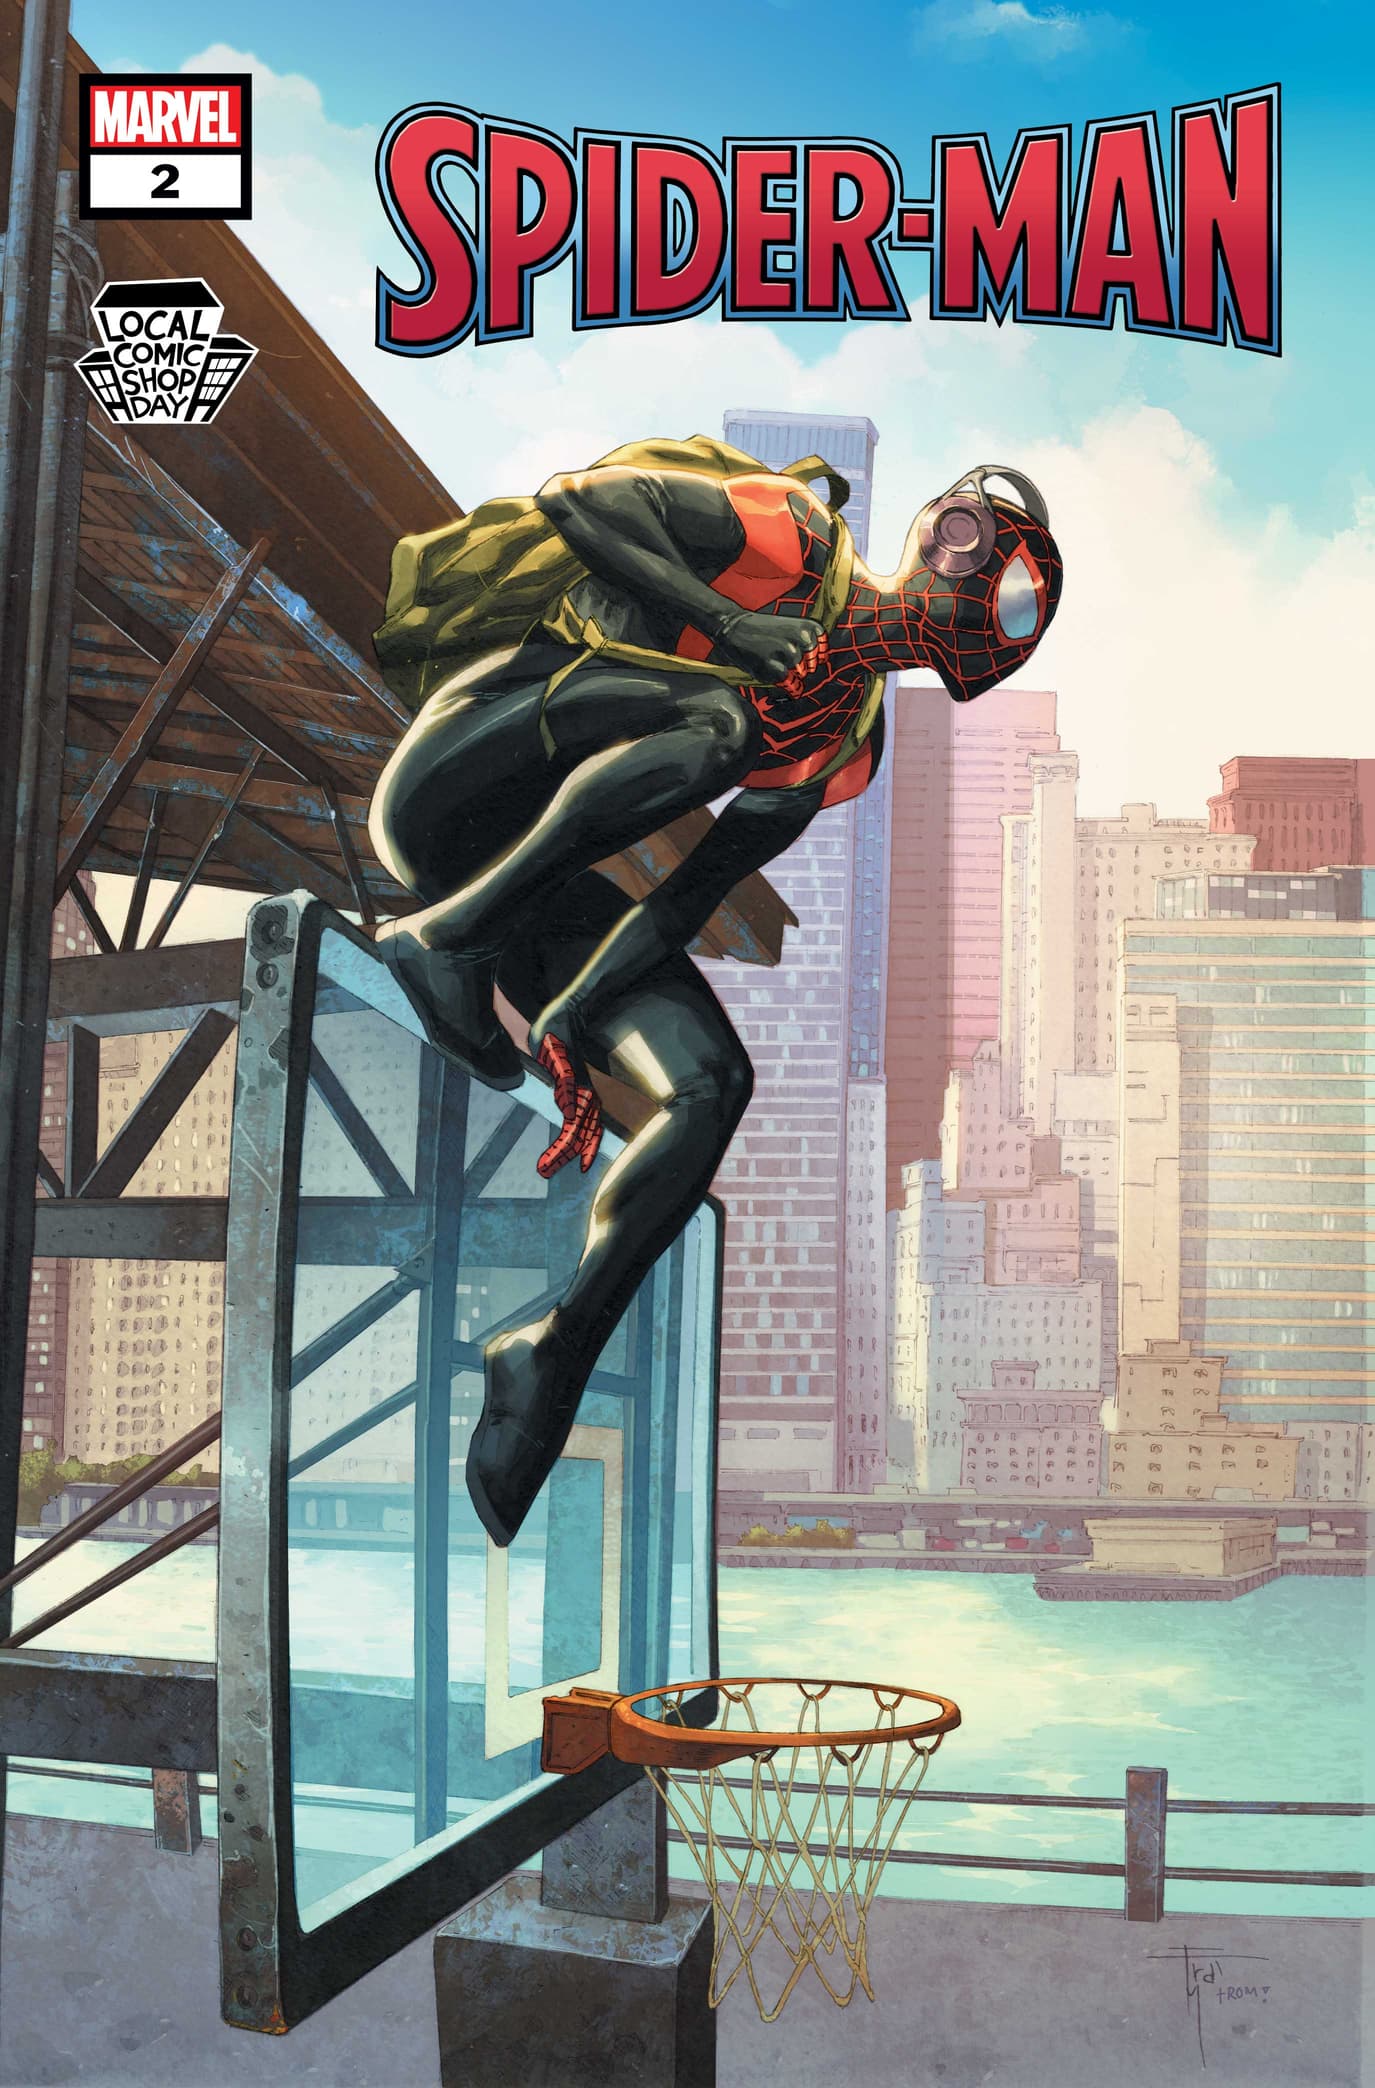 Spider-Man #2 Local Comic Shop Day Variant Cover by Francesco Mobili